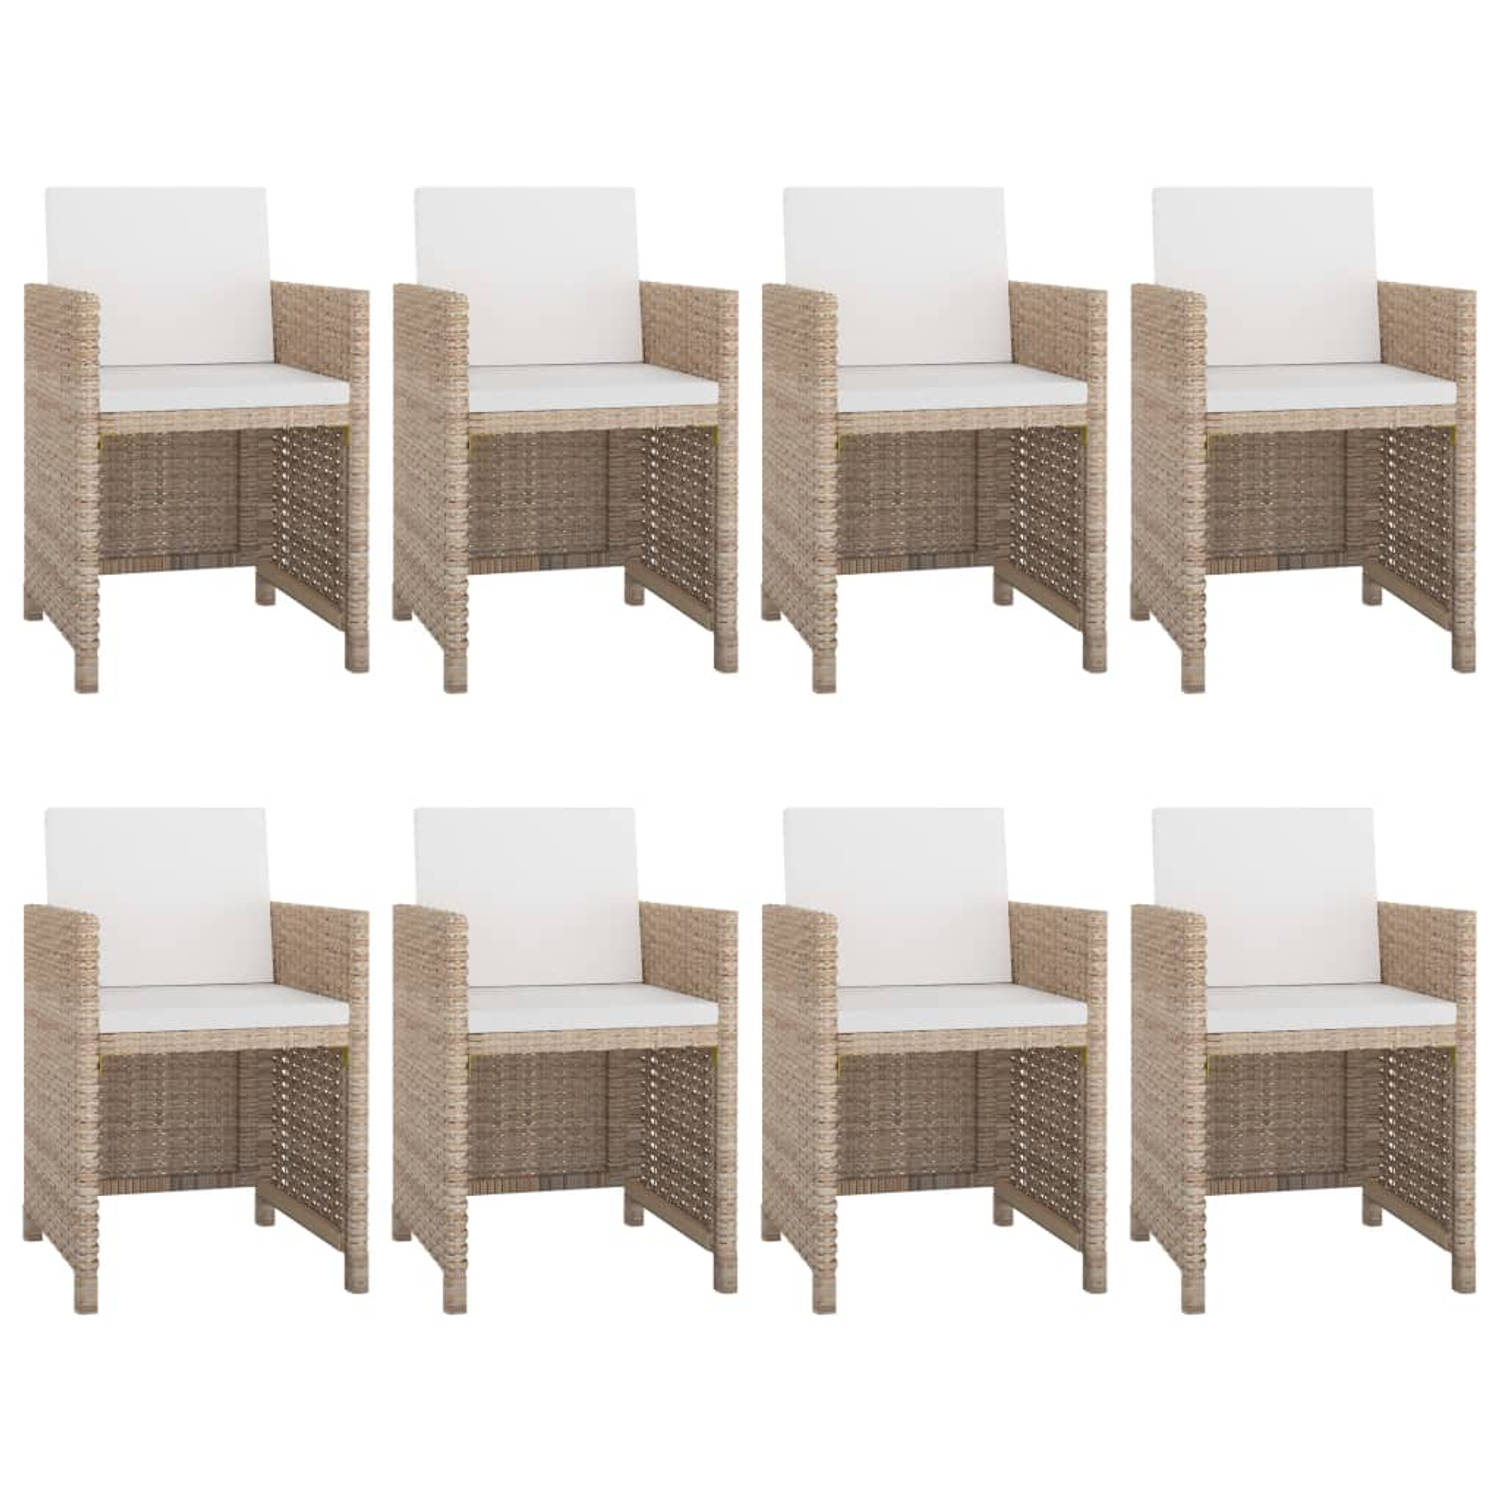 The Living Store-9-delige-Tuinset-met-kussens-poly-rattan-beige - Tuinset